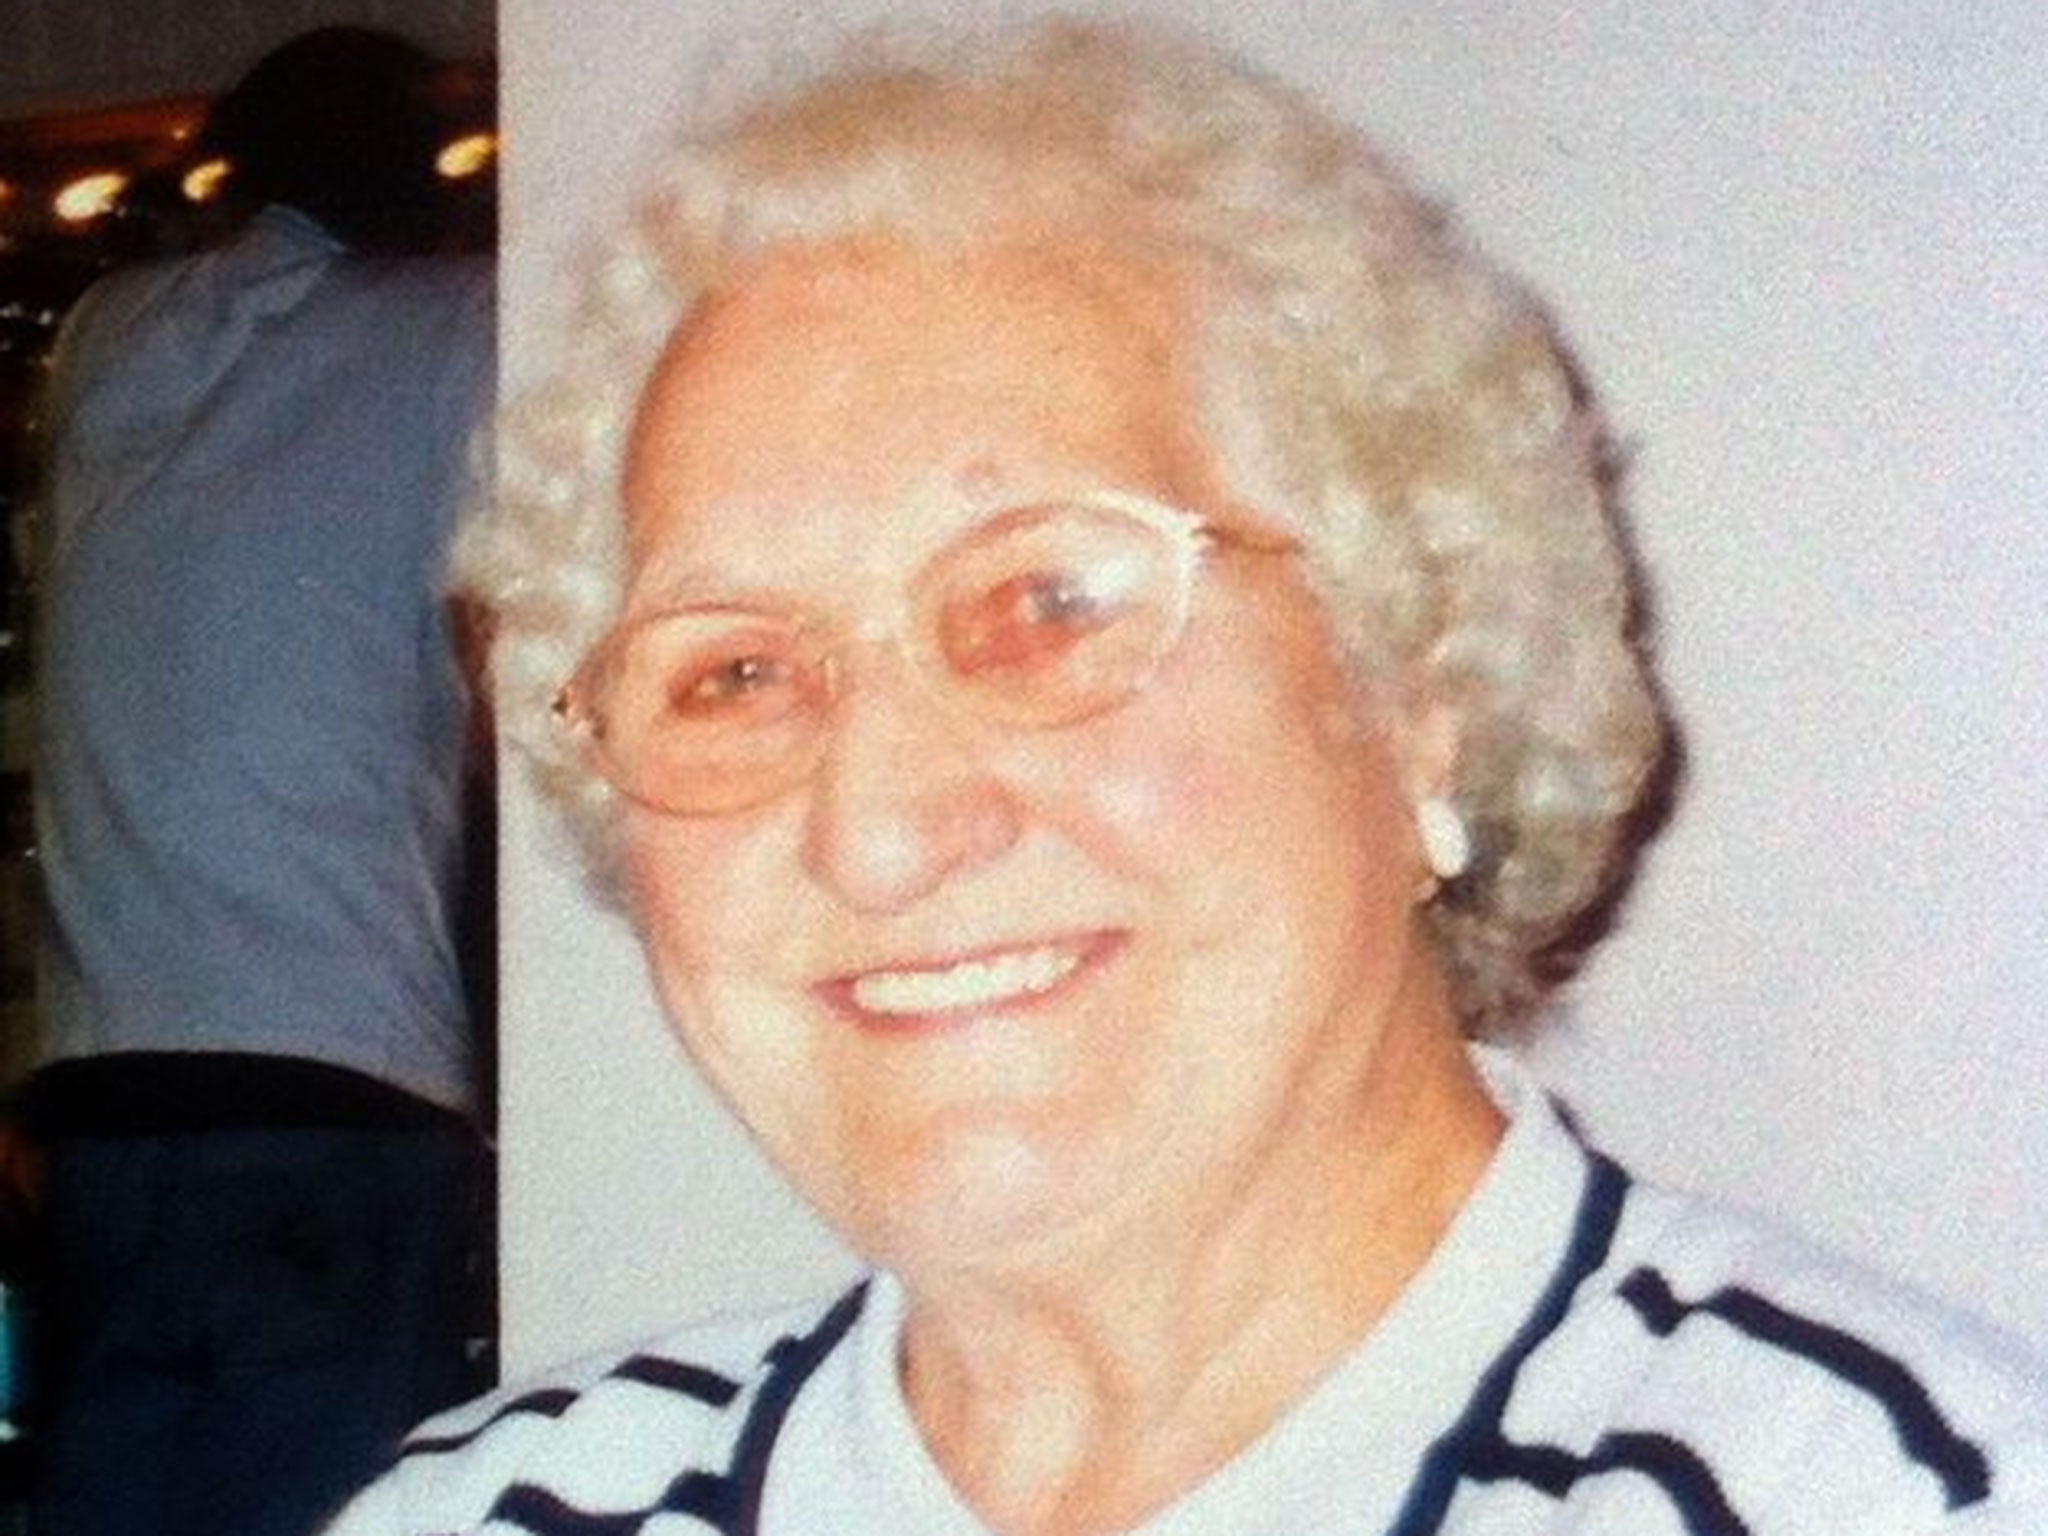 Olive Cooke, whose death in May sparked widespread concern about the deluge of requests for donations from charities